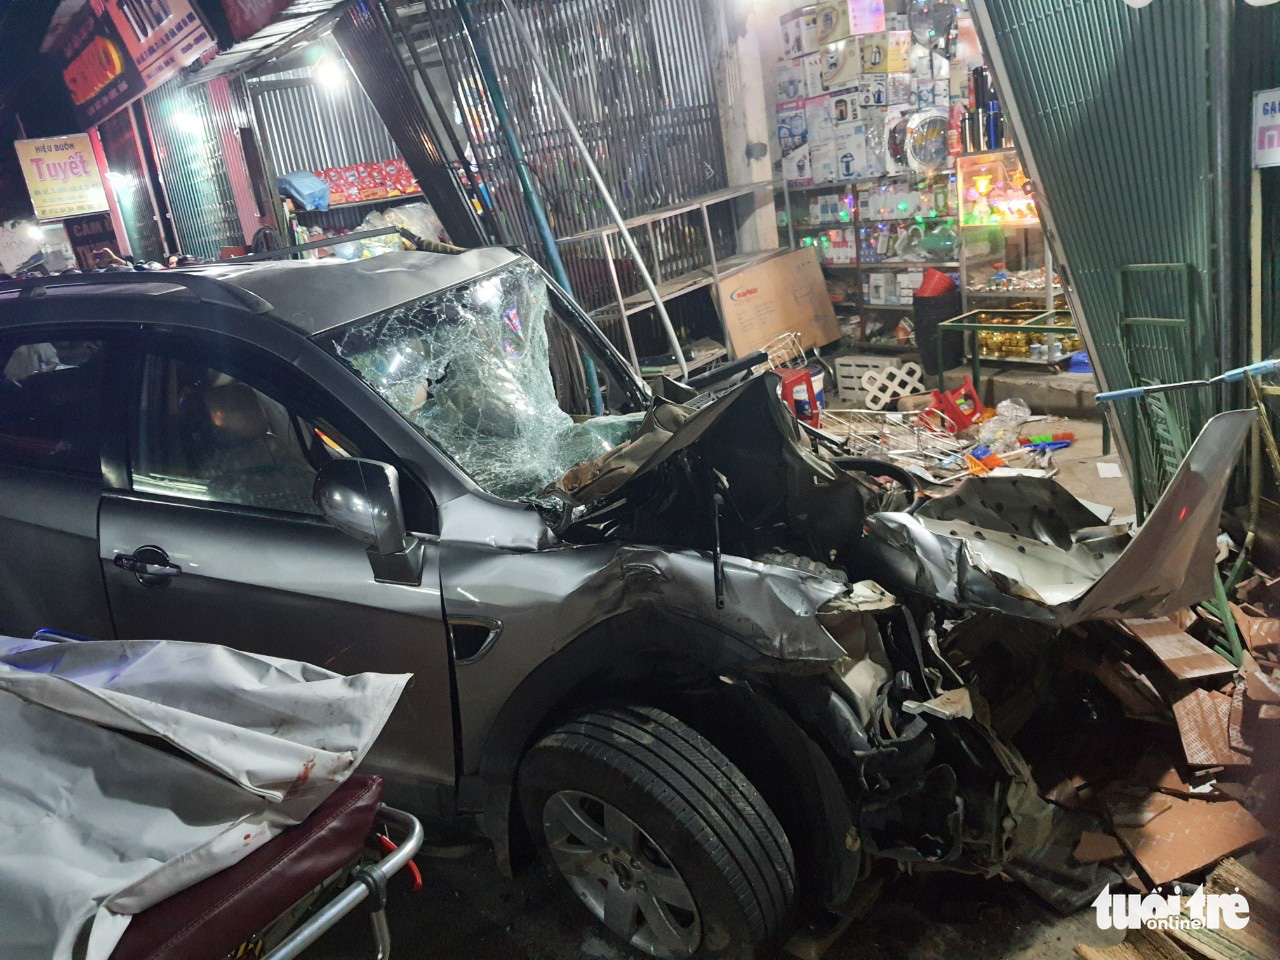 An automobile is heavily damaged following a collision with a truck in Quang Ngai Province, Vietnam, October 24, 2020. Photo: L.D. / Tuoi Tre